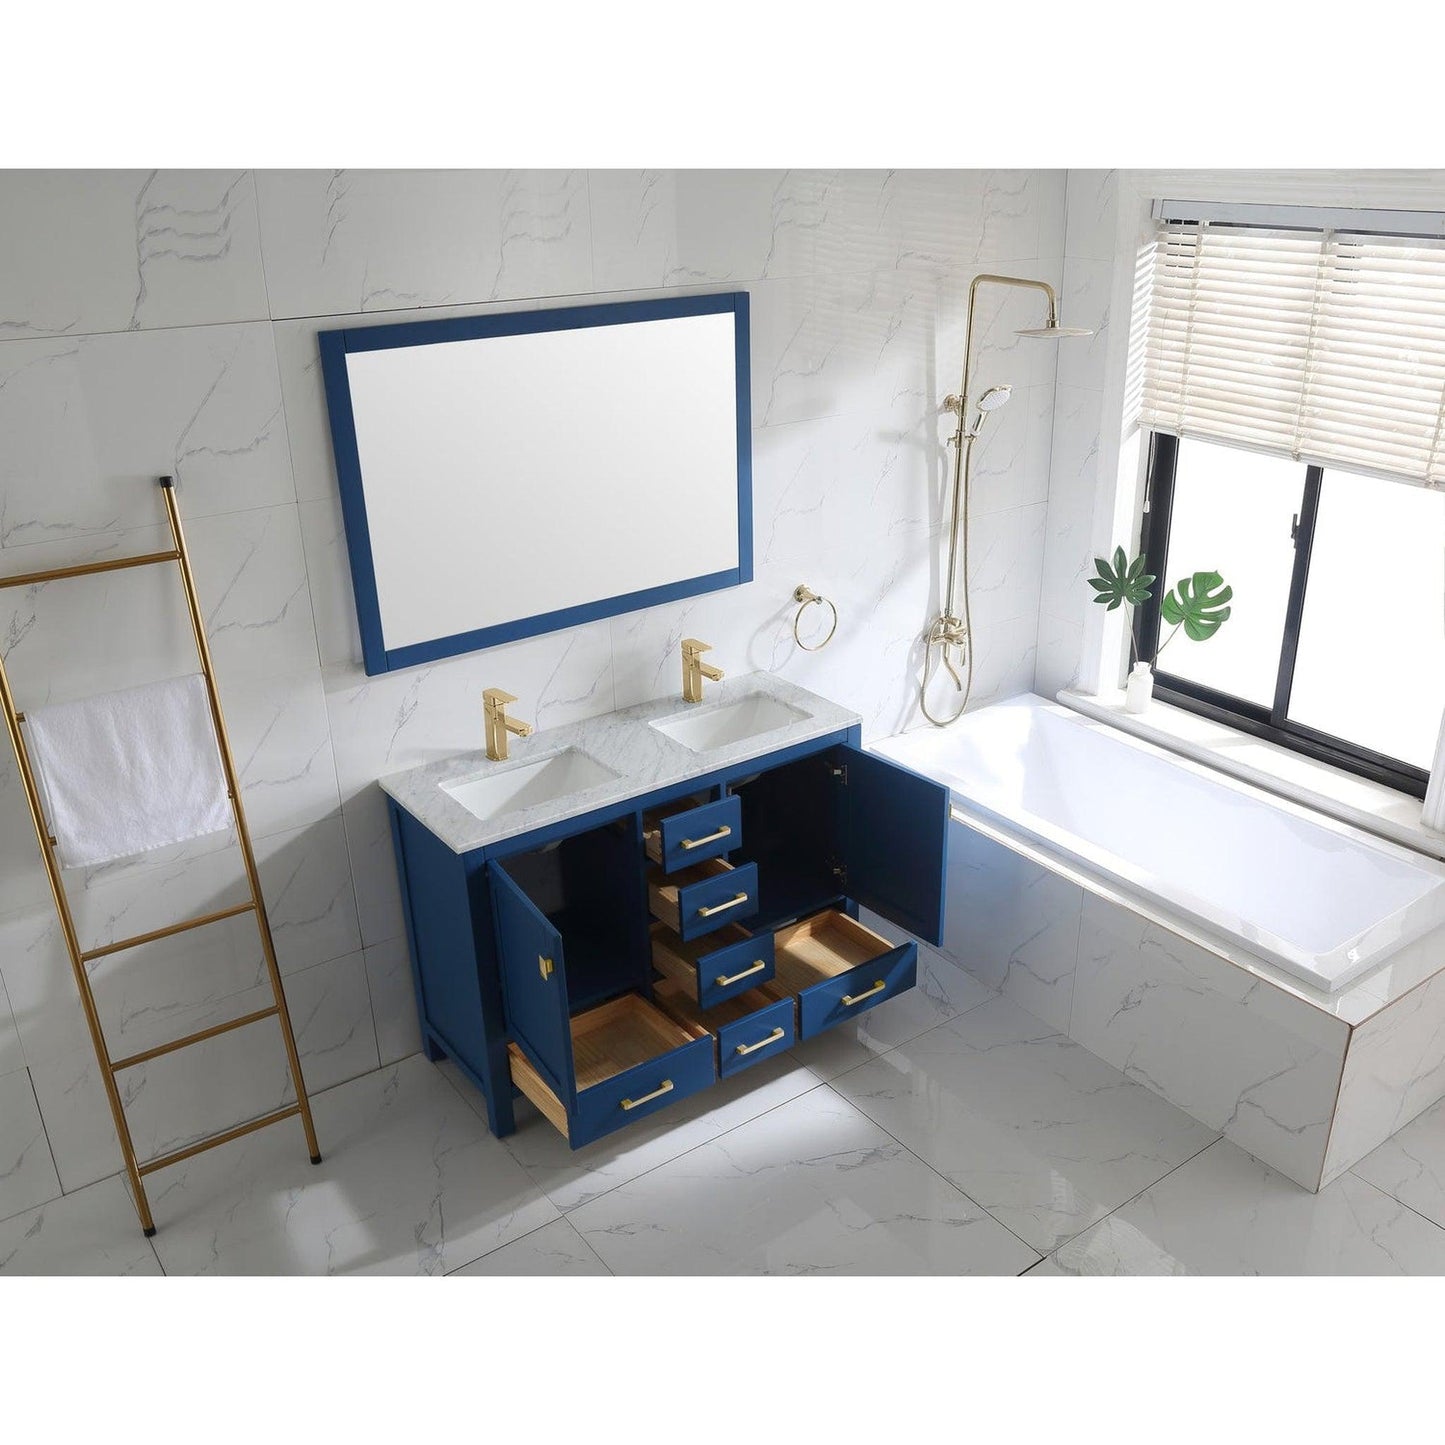 Eviva London 48" x 34" Blue Freestanding Double Bathroom Vanity Sink With Gold Coated Handles and Carrara Marble Countertop